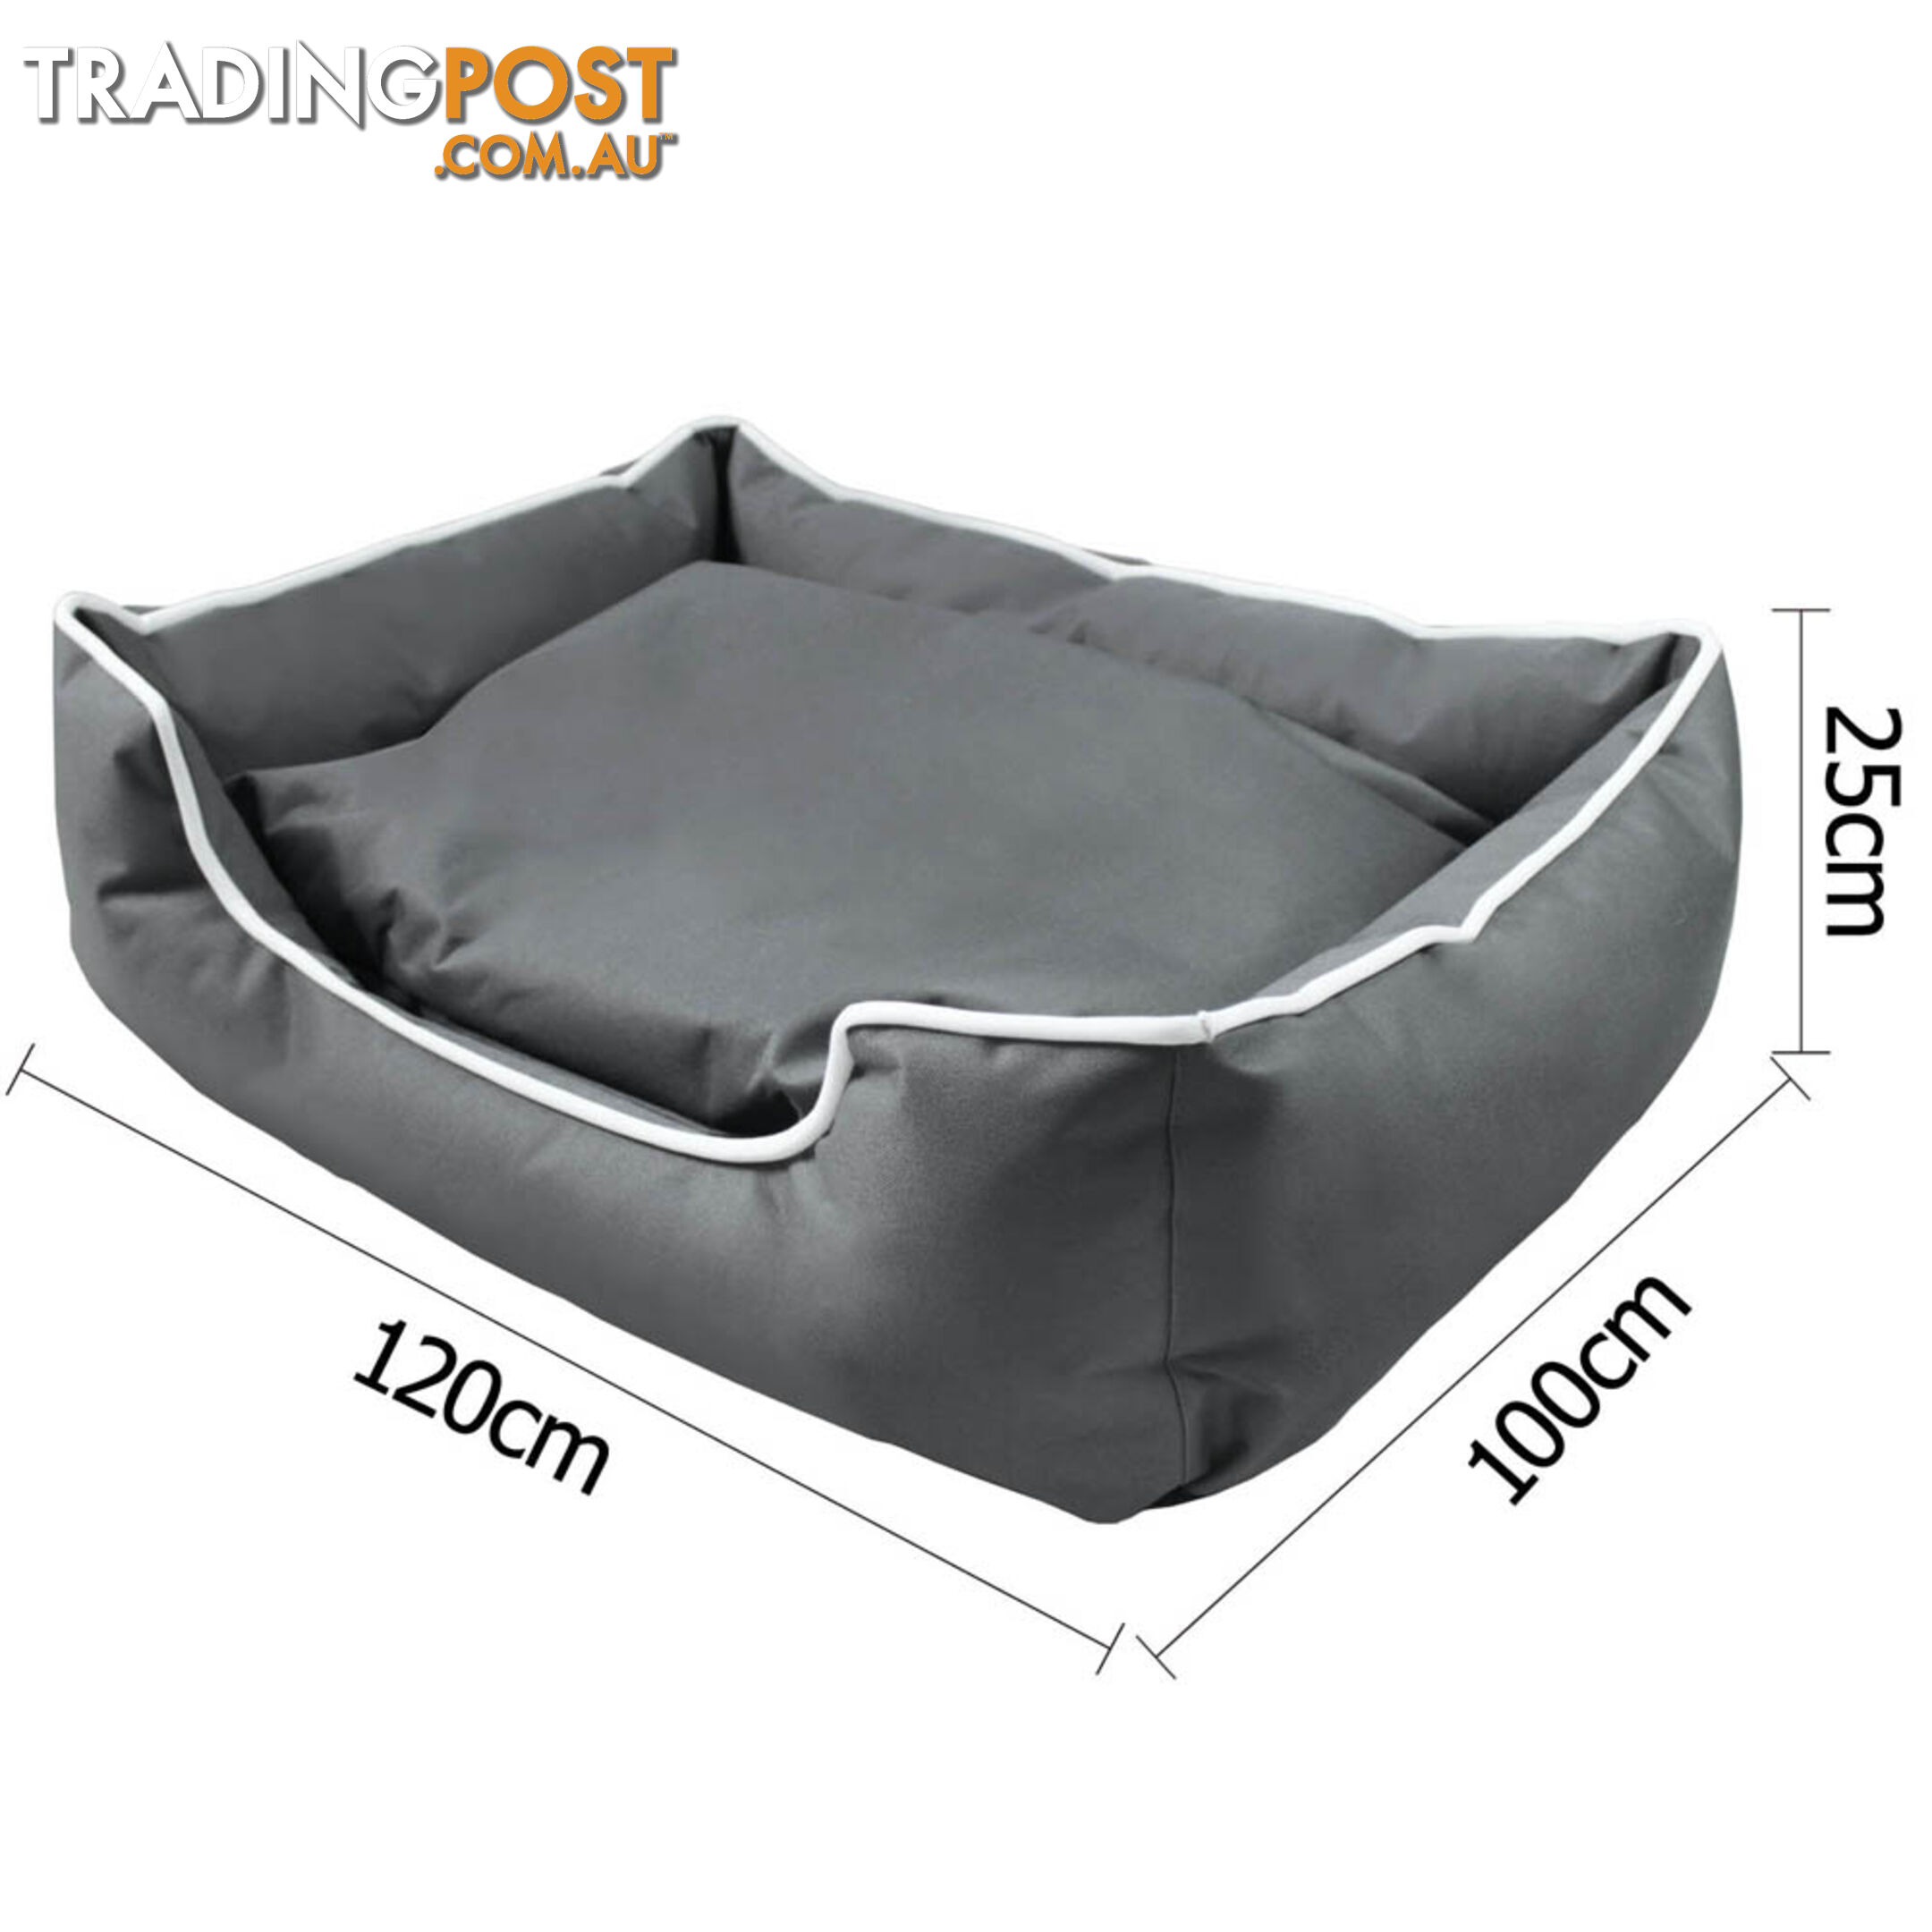 Heavy Duty Pet Bed - Extra Large